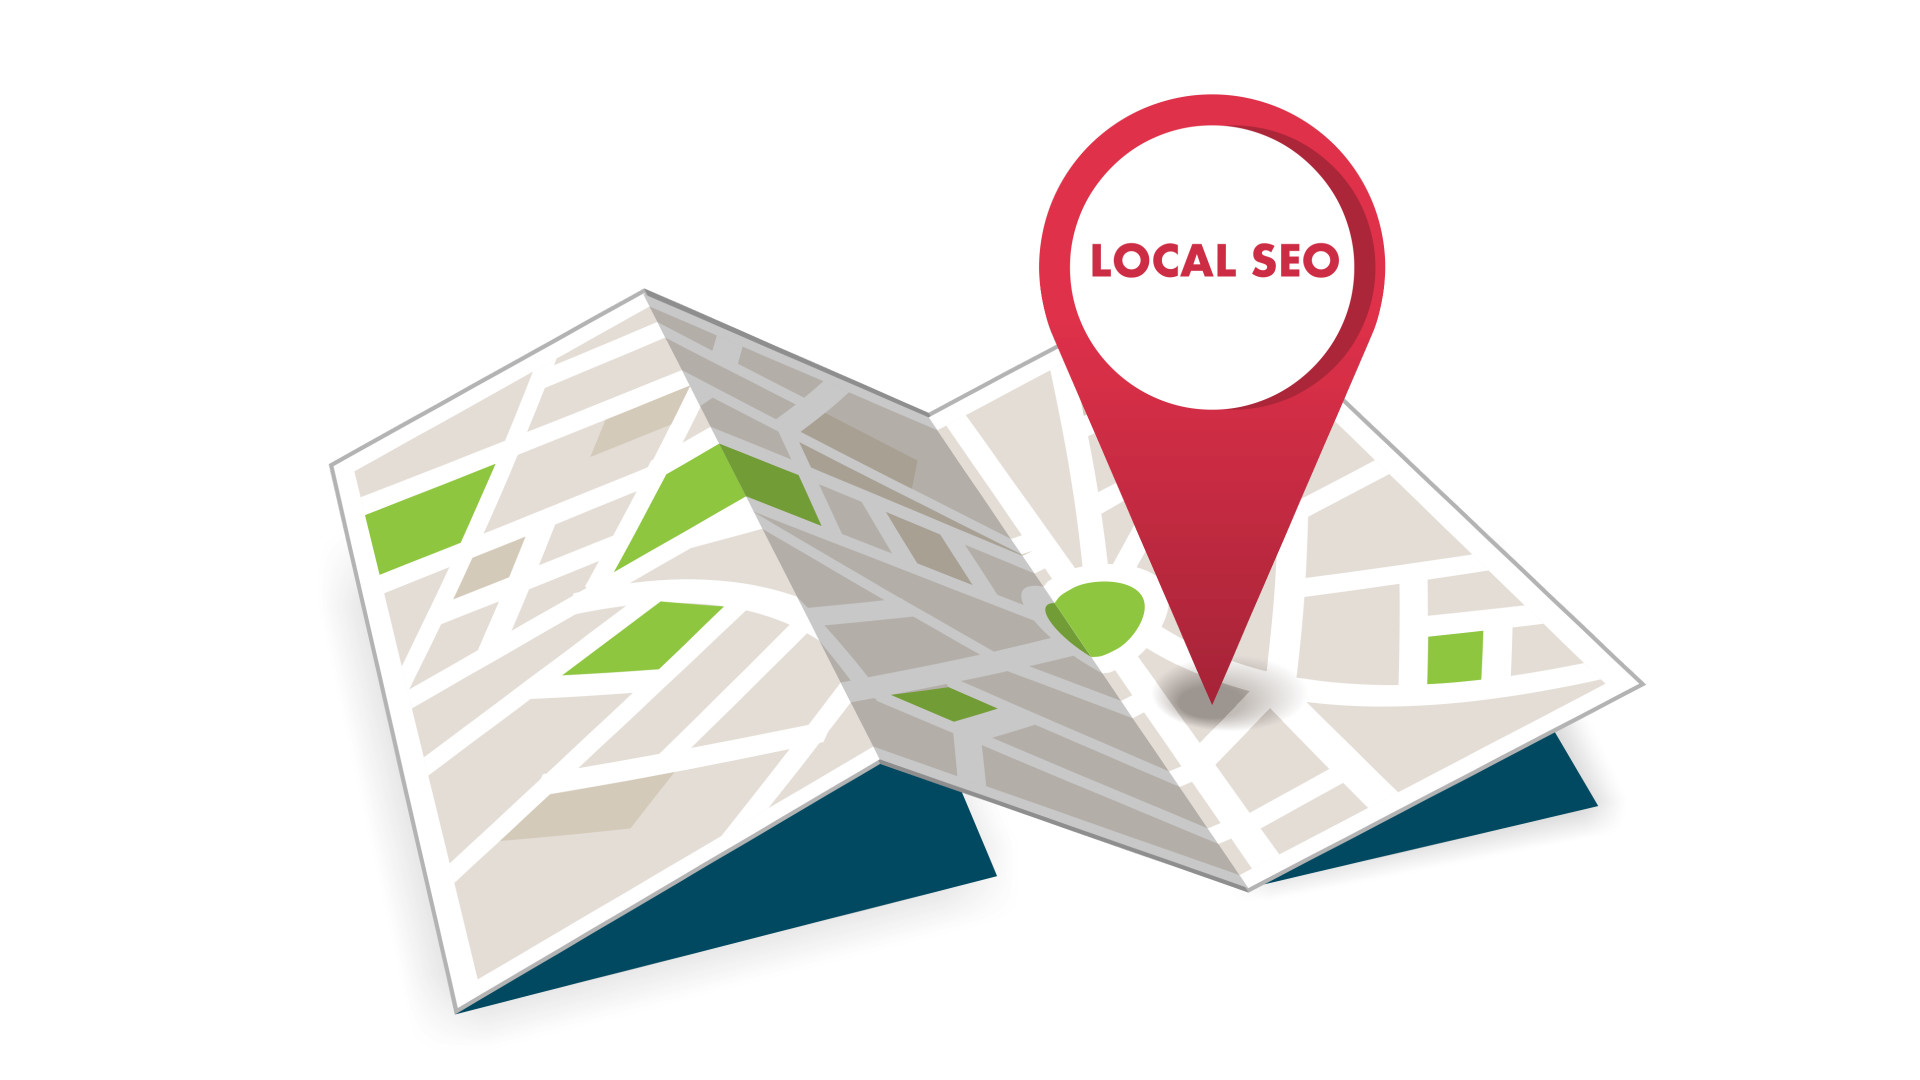 6 Benefits of Local SEO for Small Businesses